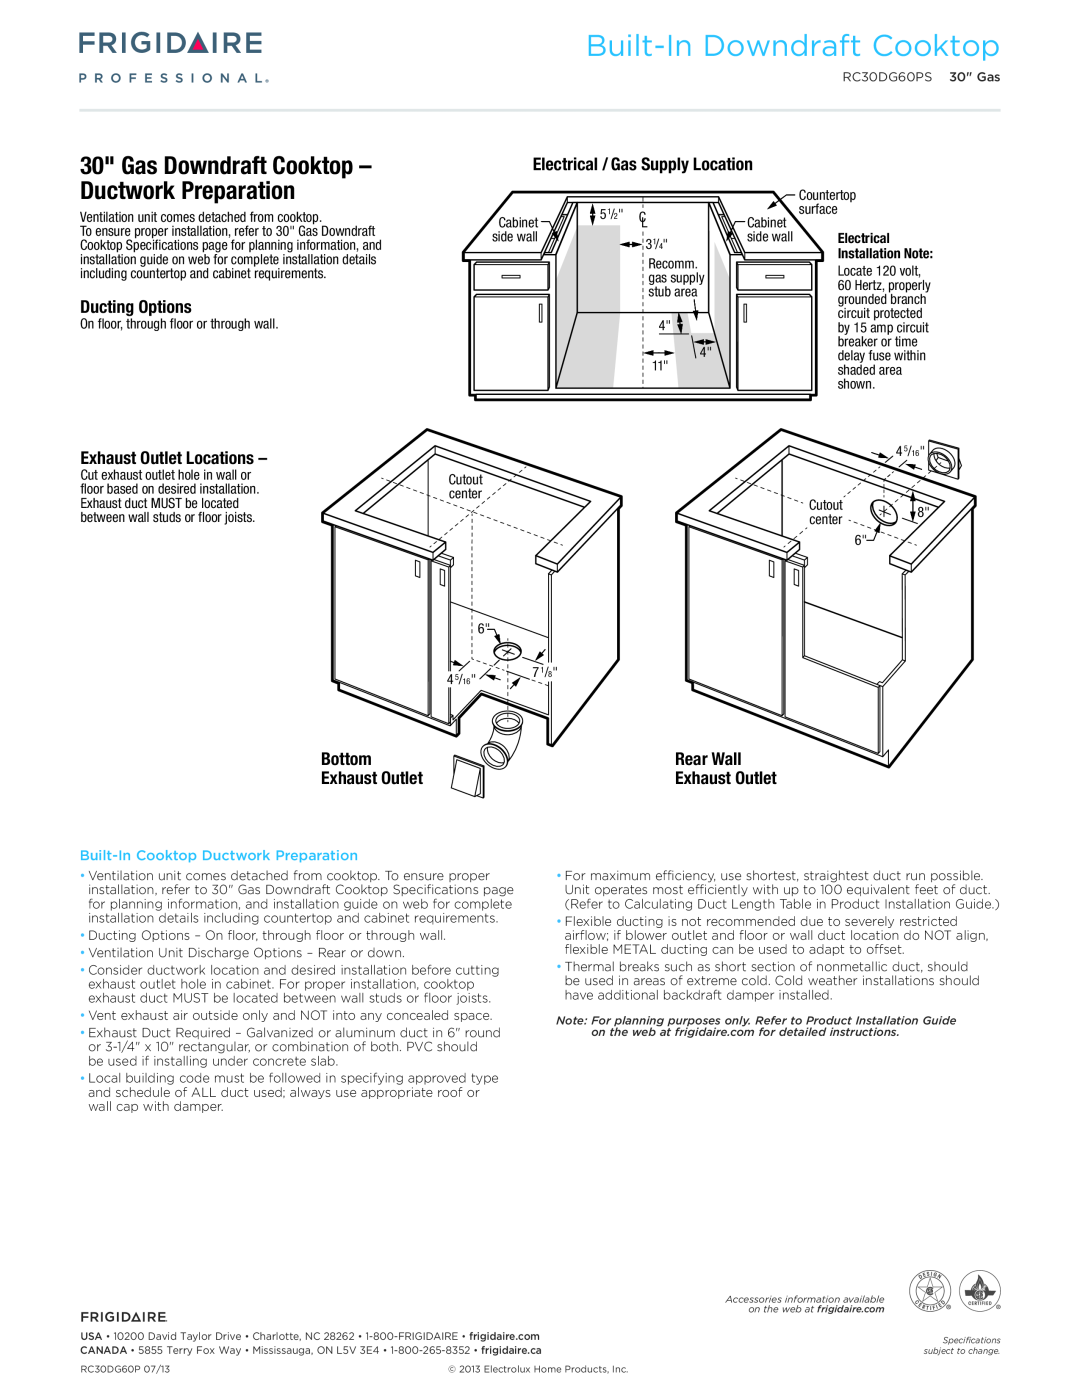 Frigidaire RC30G60PS Electrical / Gas Supply Location, Ducting Options, Exhaust Outlet Locations, Bottom, Rear Wall 